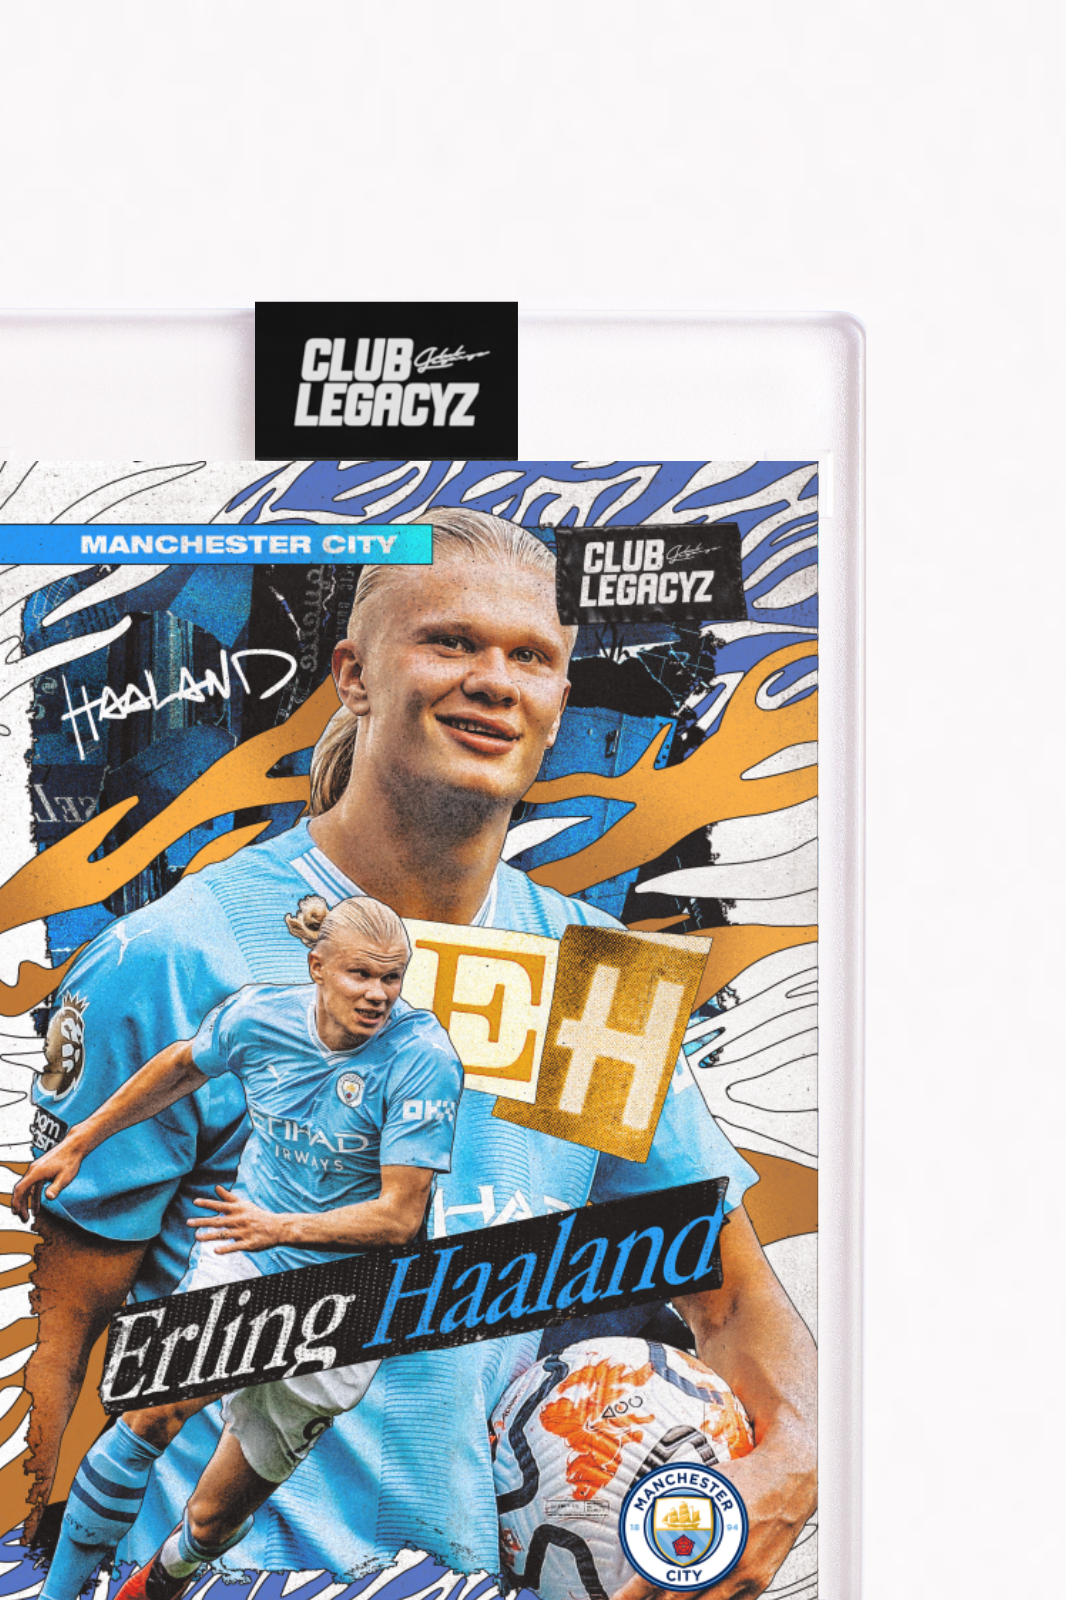 Manchester City - Erling Haaland Icon limited to 999